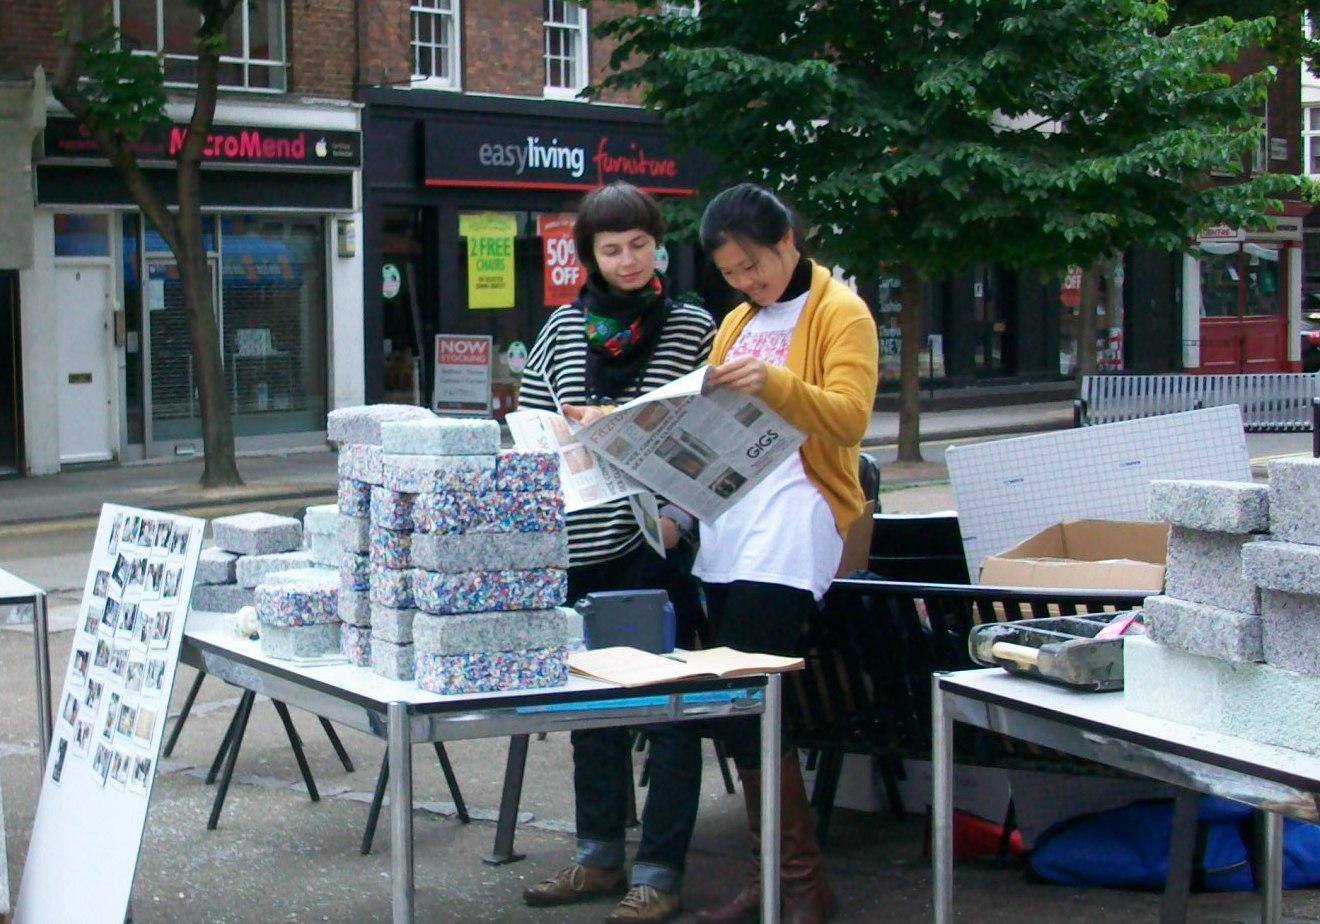 Two women read Fitzrovia News at a stall in Whitfield Gardens